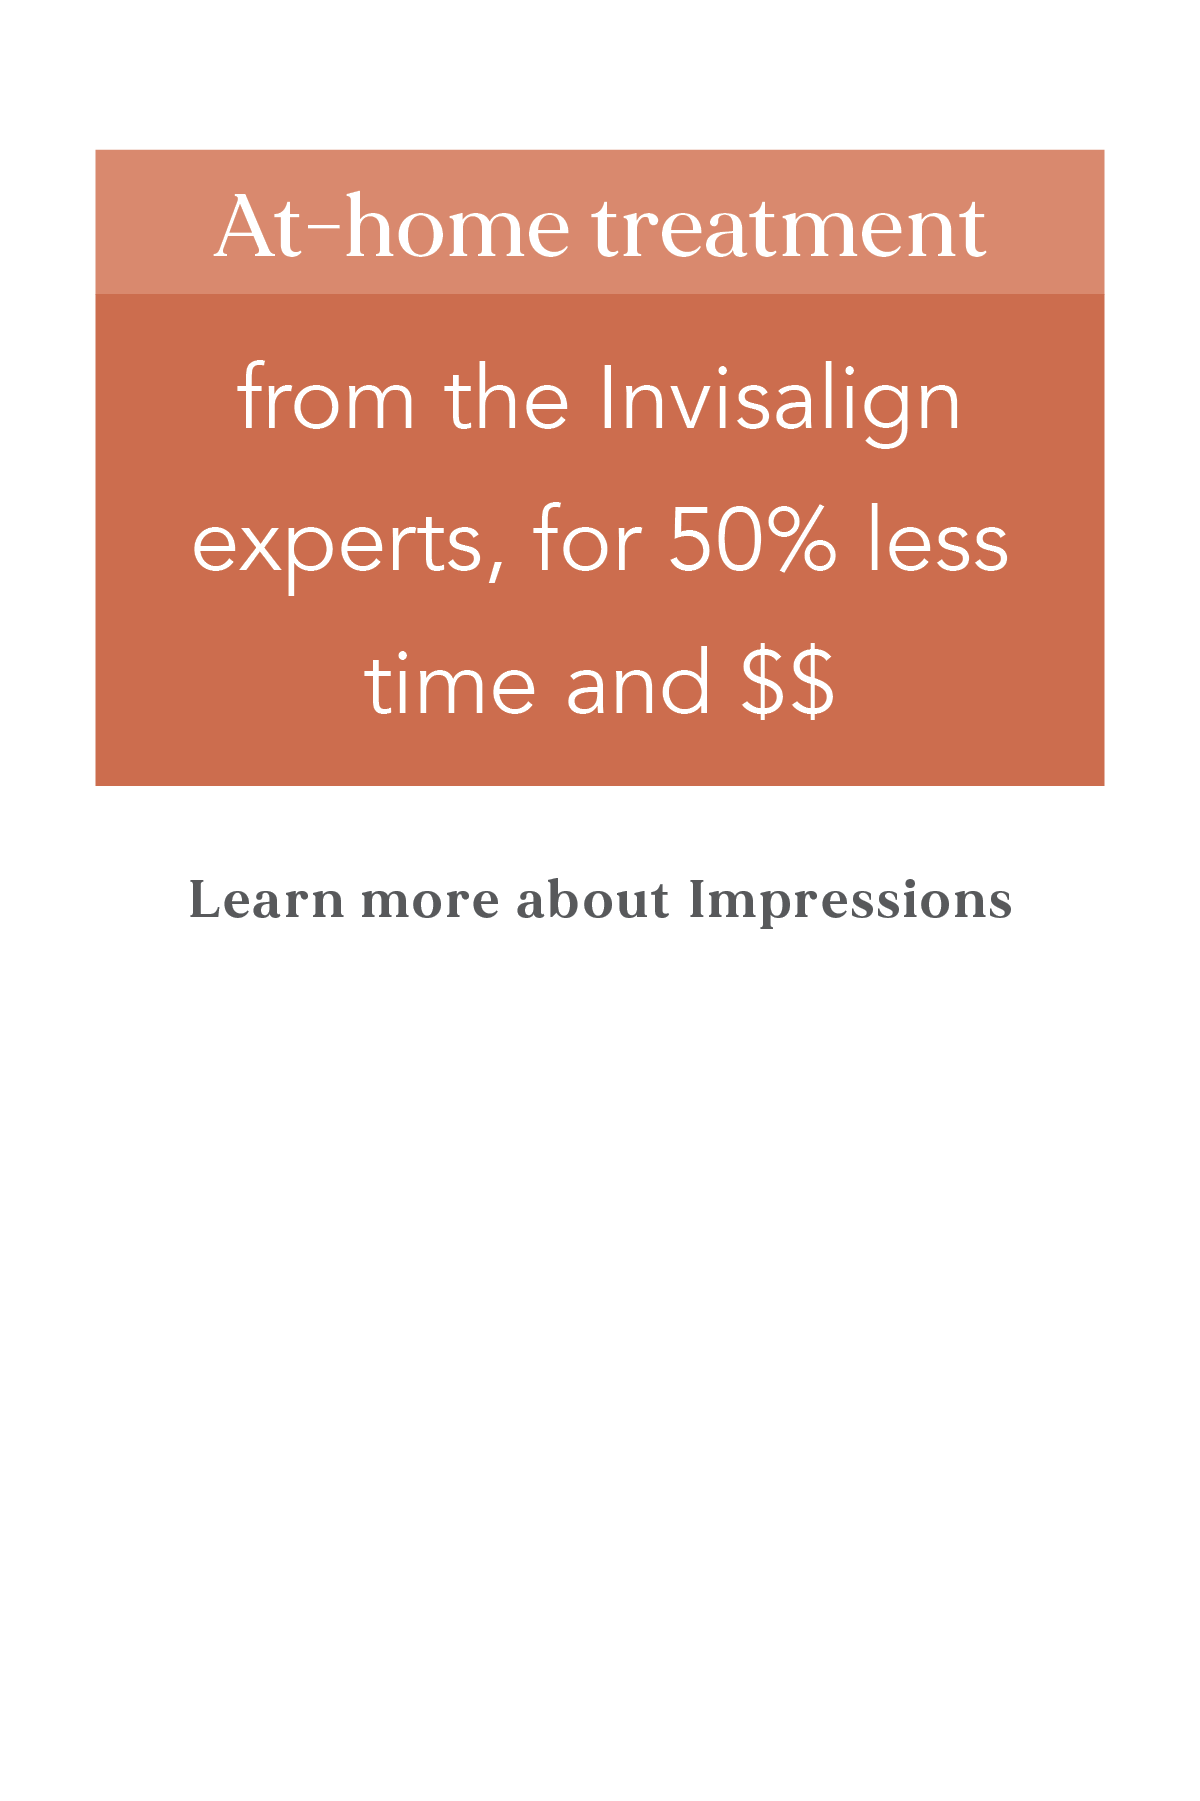 At-home treatment from the Invisalign experts - Impressions